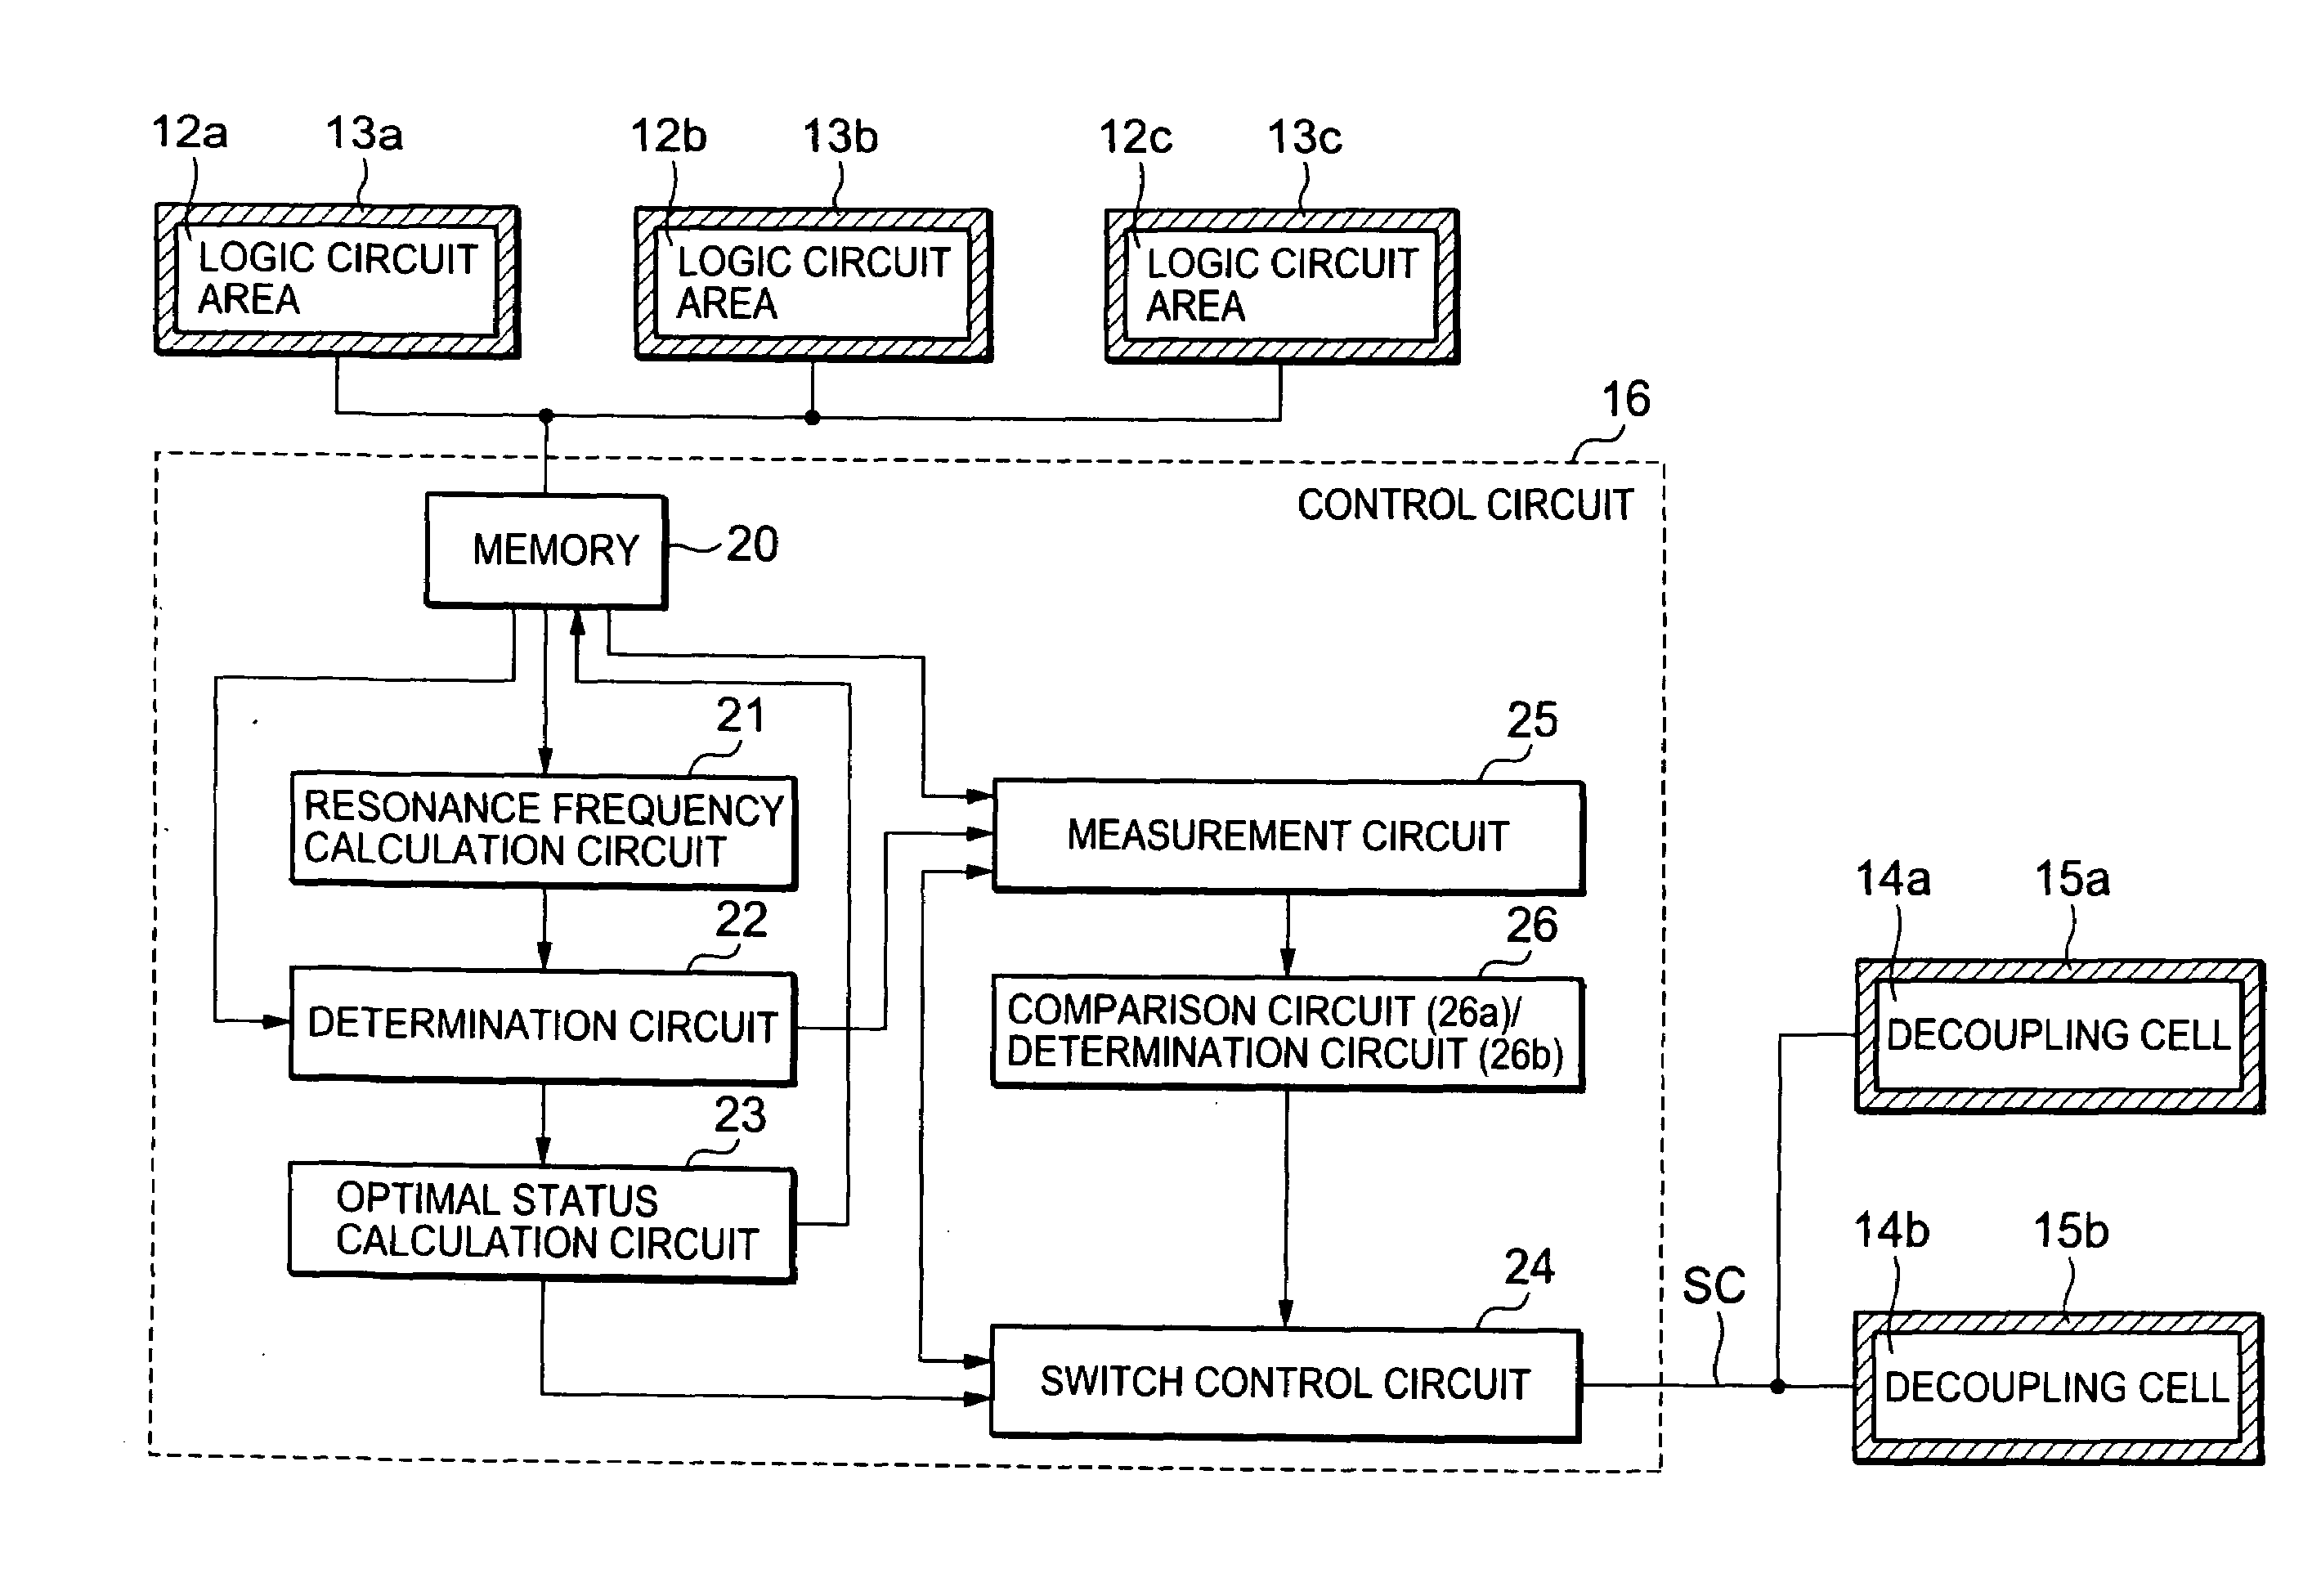 Semiconductor integrated circuit device having control circuit to selectively activate decoupling cells